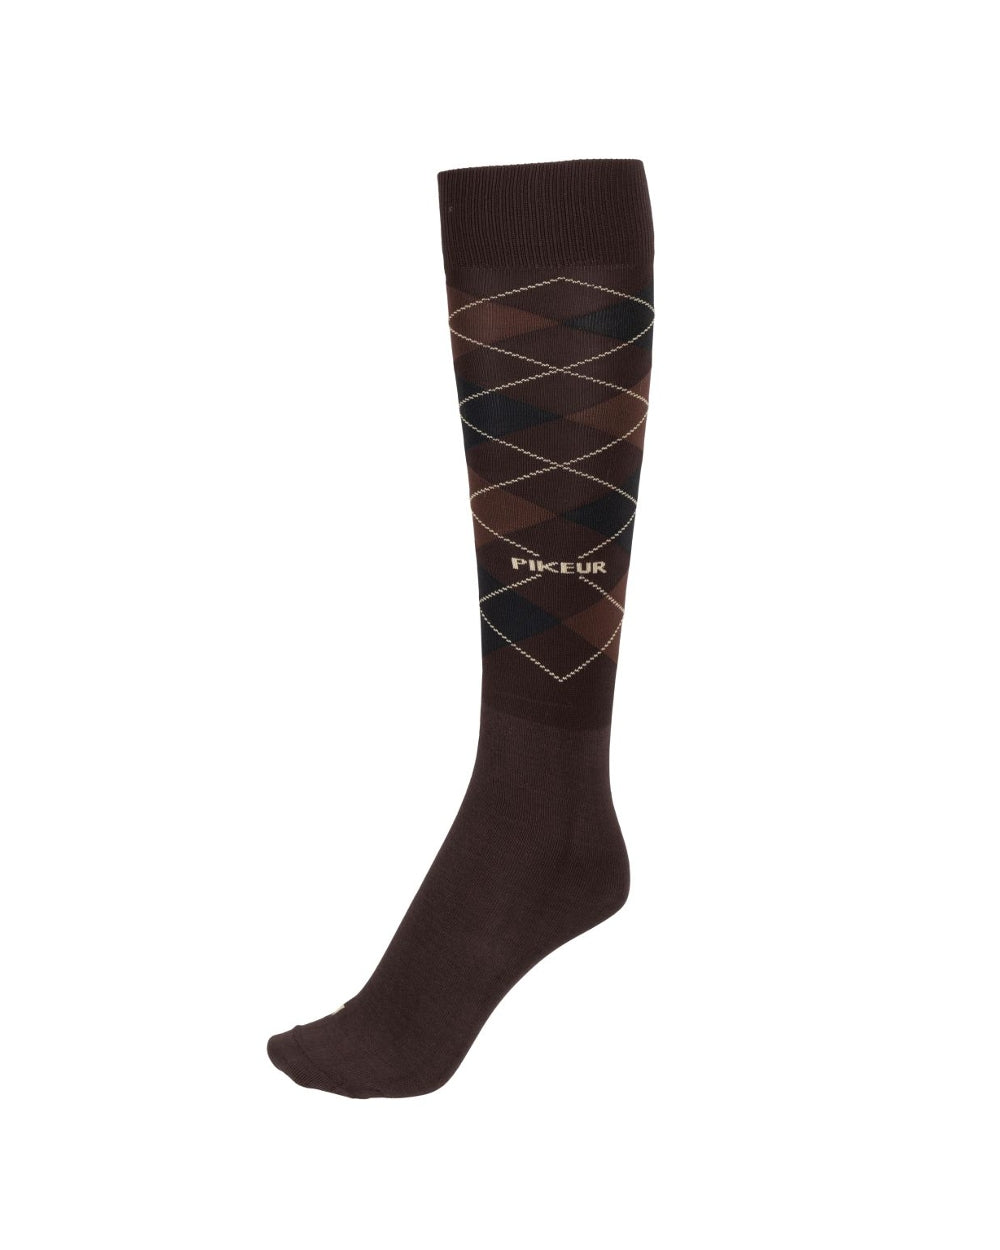 Pikeur Checked Knee Socks in Chocolate 